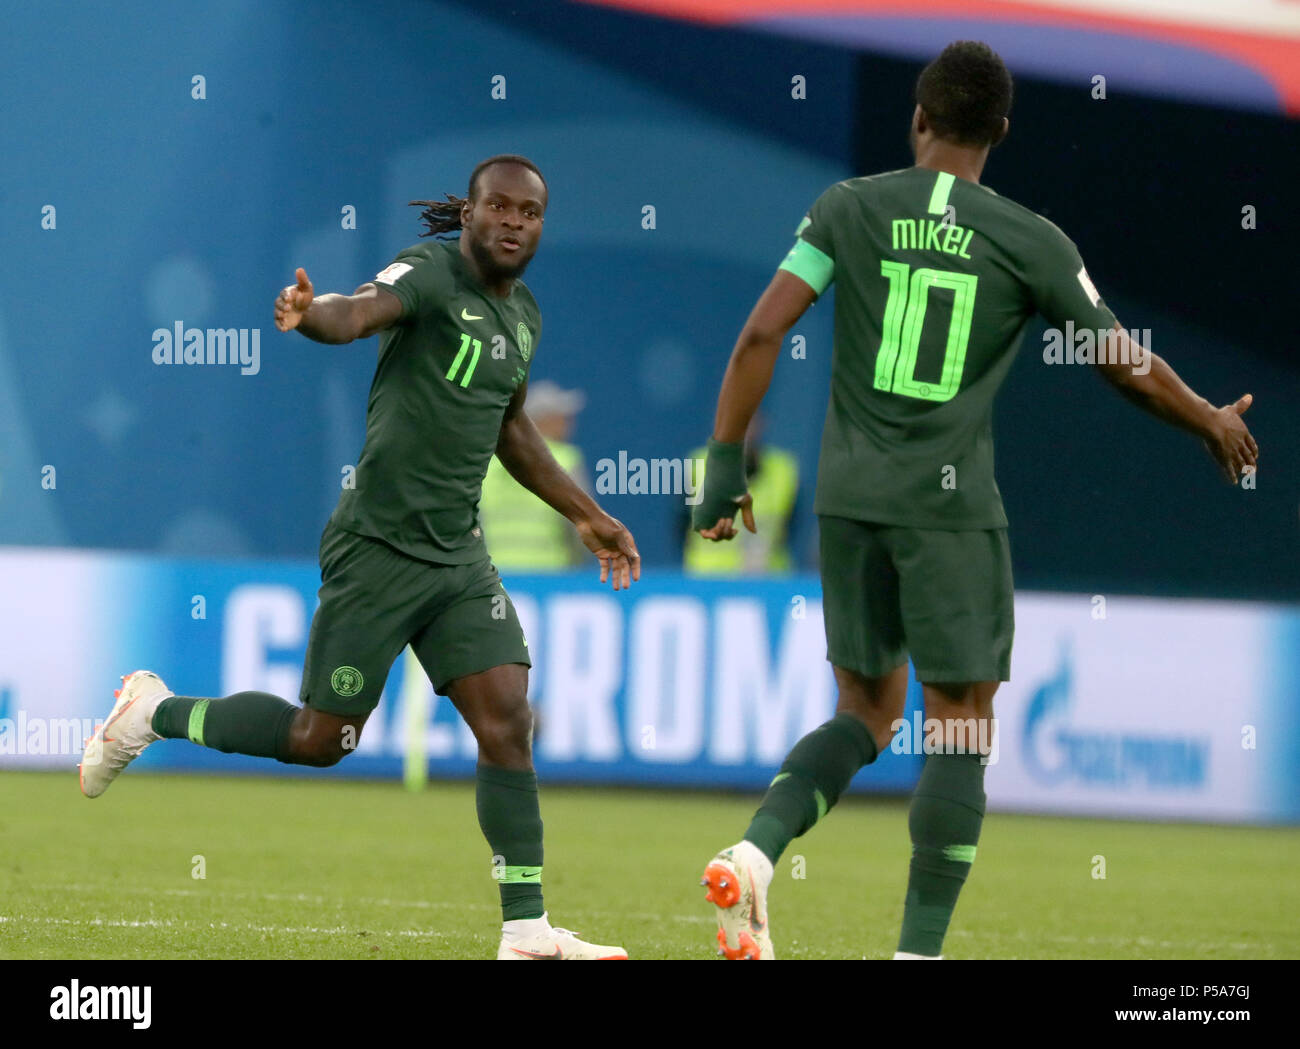 Moscow, Russia. 26th June, 2018. Soccer, World Cup 2018, Preliminary round, Group D, 3rd game day, Nigeria vs Argentina at the St. Petersburg Stadium: Nigeria's Victor Moses (L) celebrates his 1-1 goal with Nigeria's John Obi Mikel. Credit: Cezaro De Luca/dpa/Alamy Live News Stock Photo